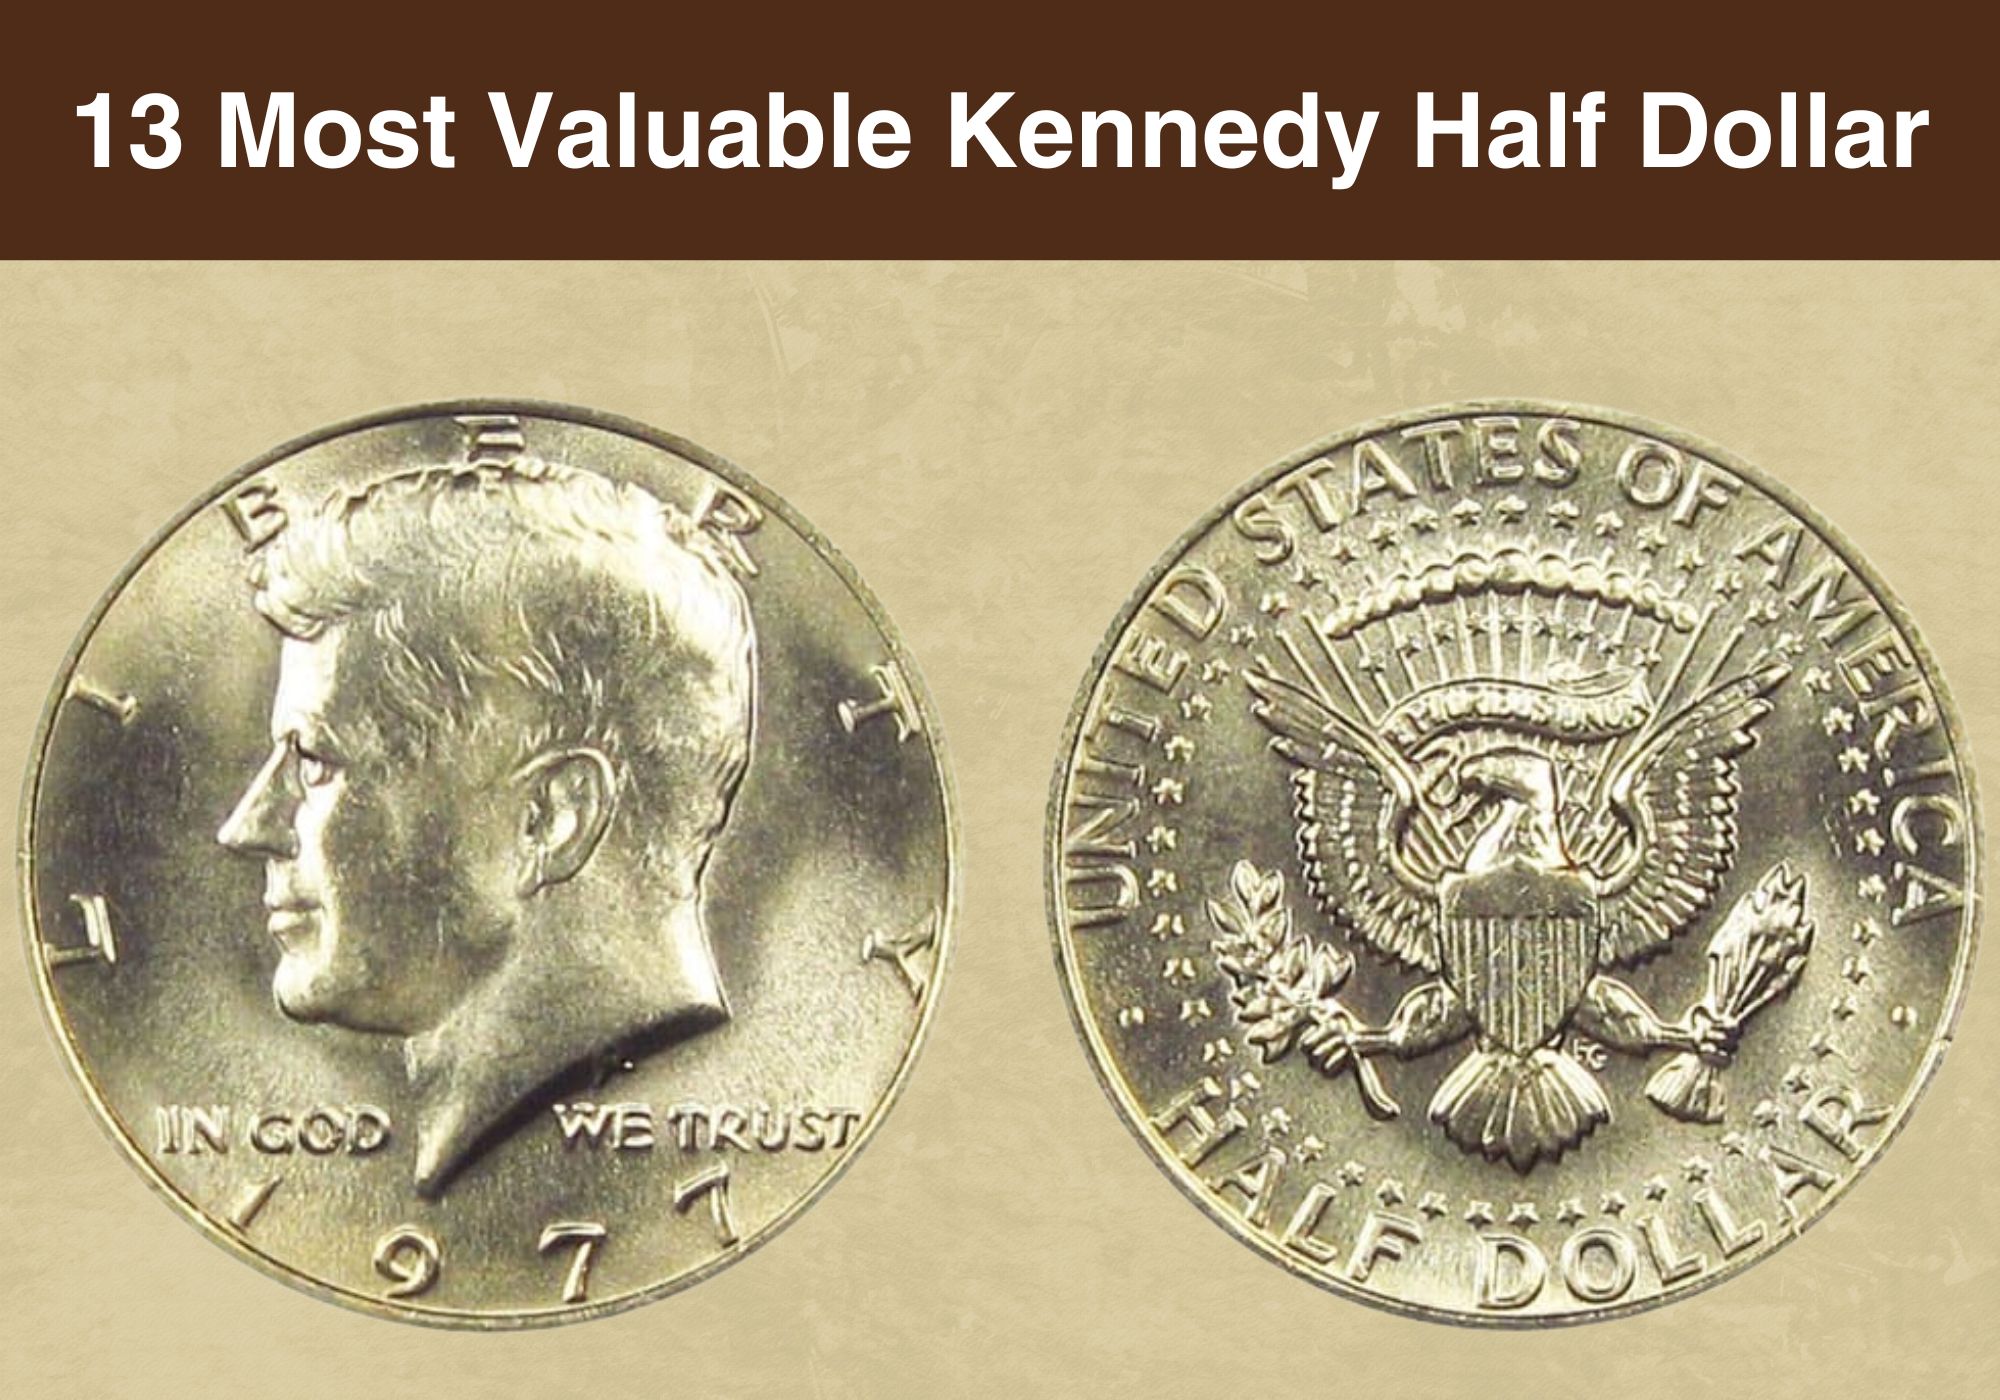 Check your pockets: Here are the 5 most valuable coins in